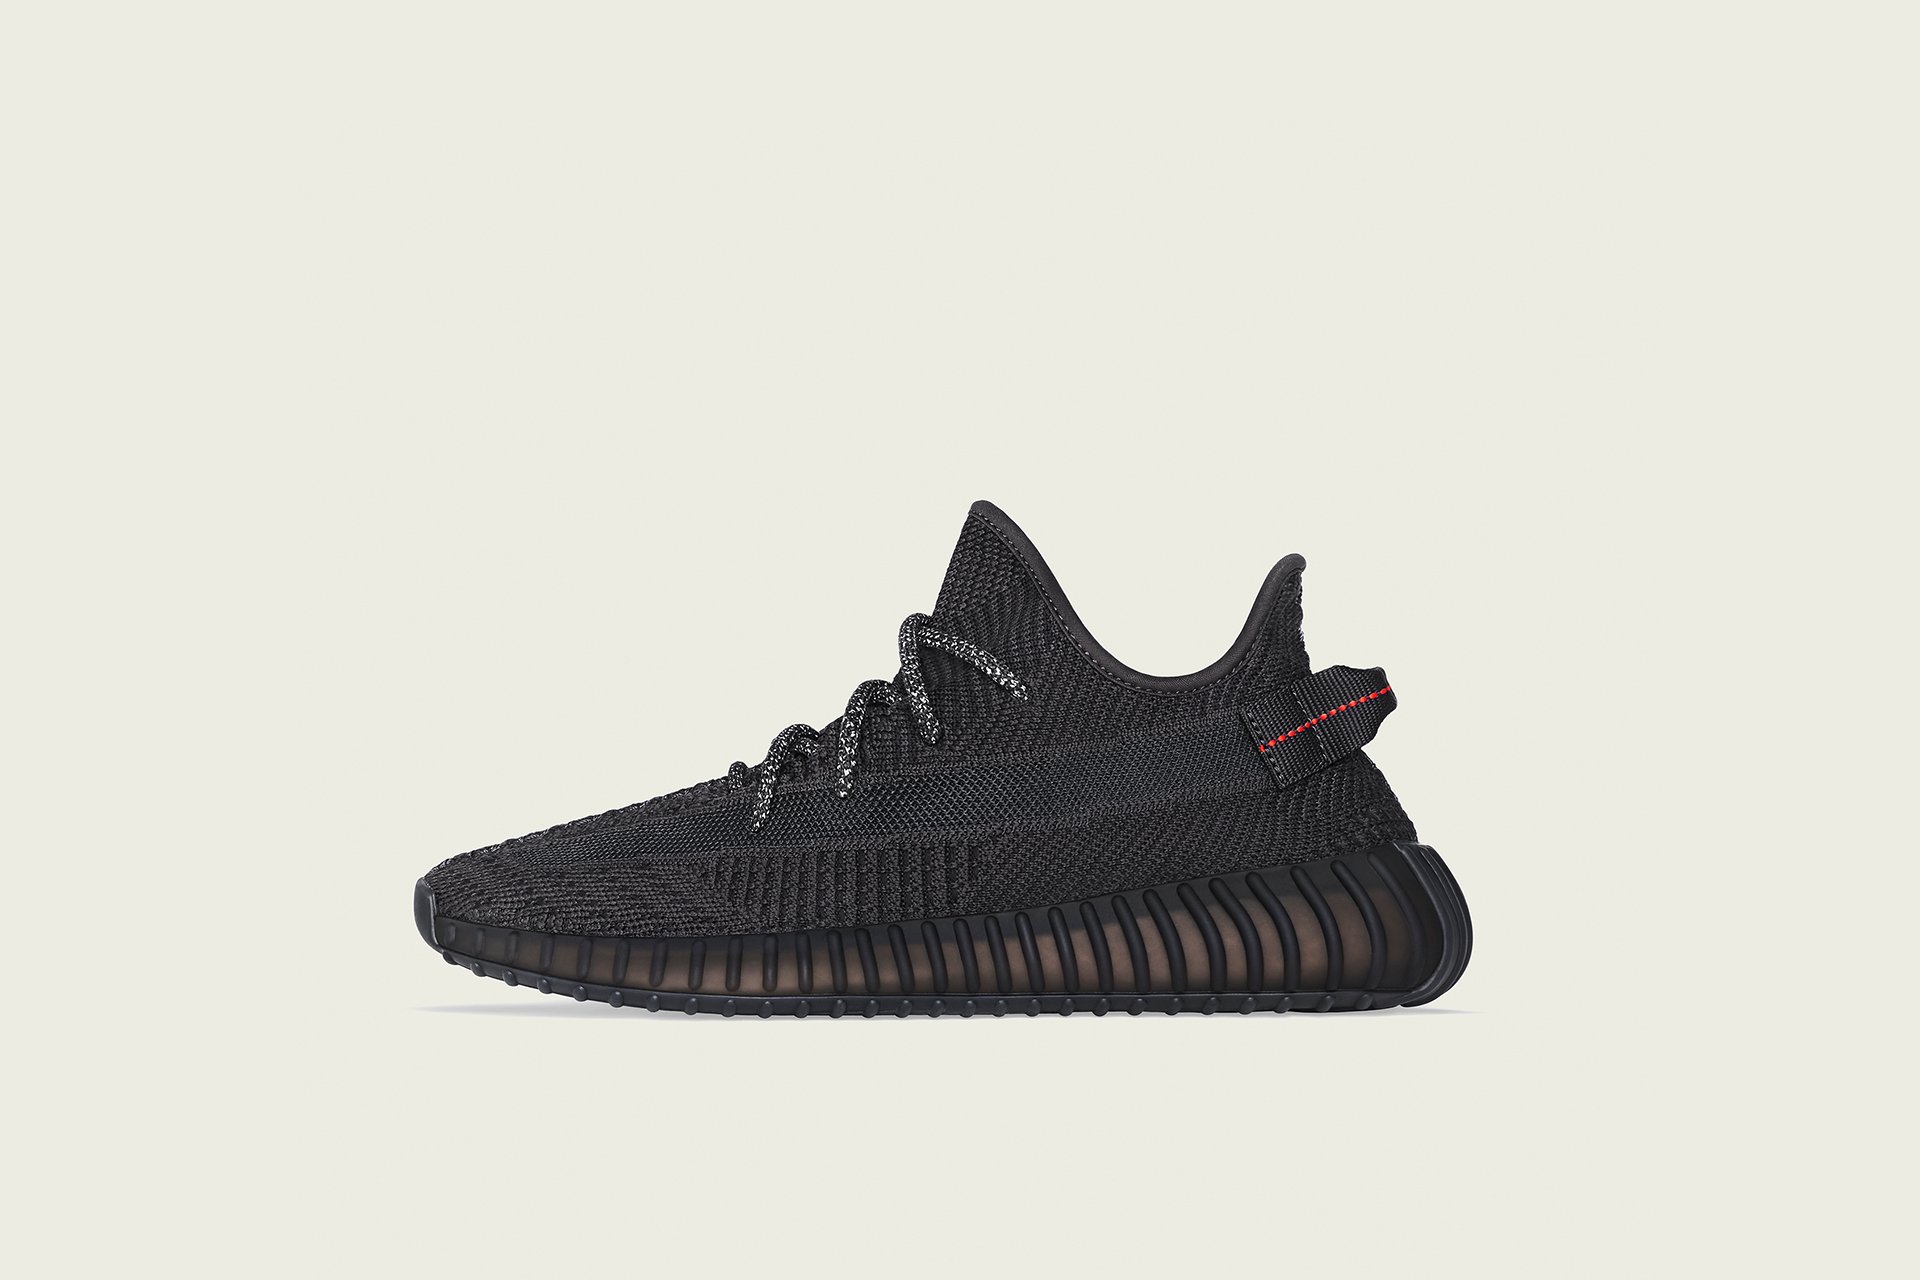 Plow Motivate Much ADIDAS YEEZY BOOST 350 V2 , BLACK - Footshop - Releases